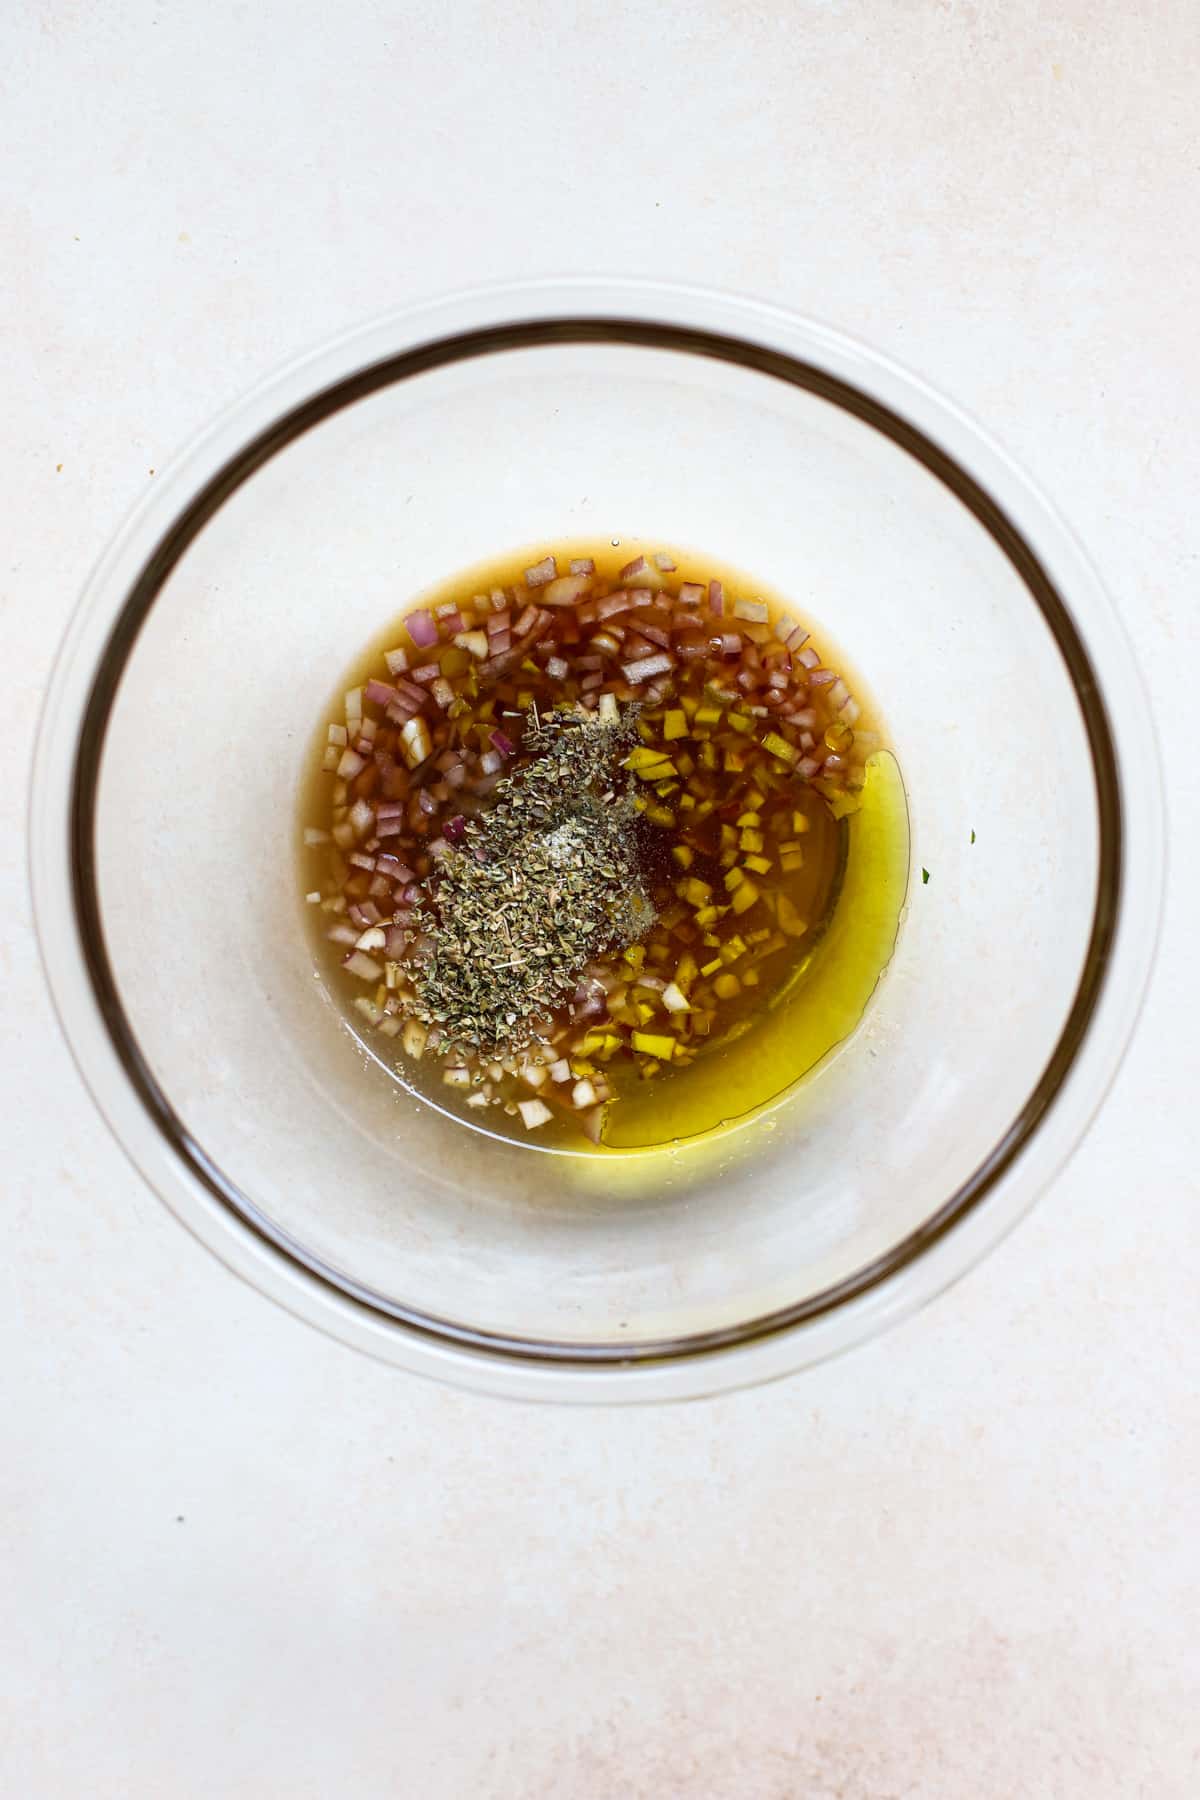 Extra virgin olive oil, sherry vinegar, lemon, minced onions, minced garlic, salt, pepper, and dried oregano in clear glass bowl on beige and white surface